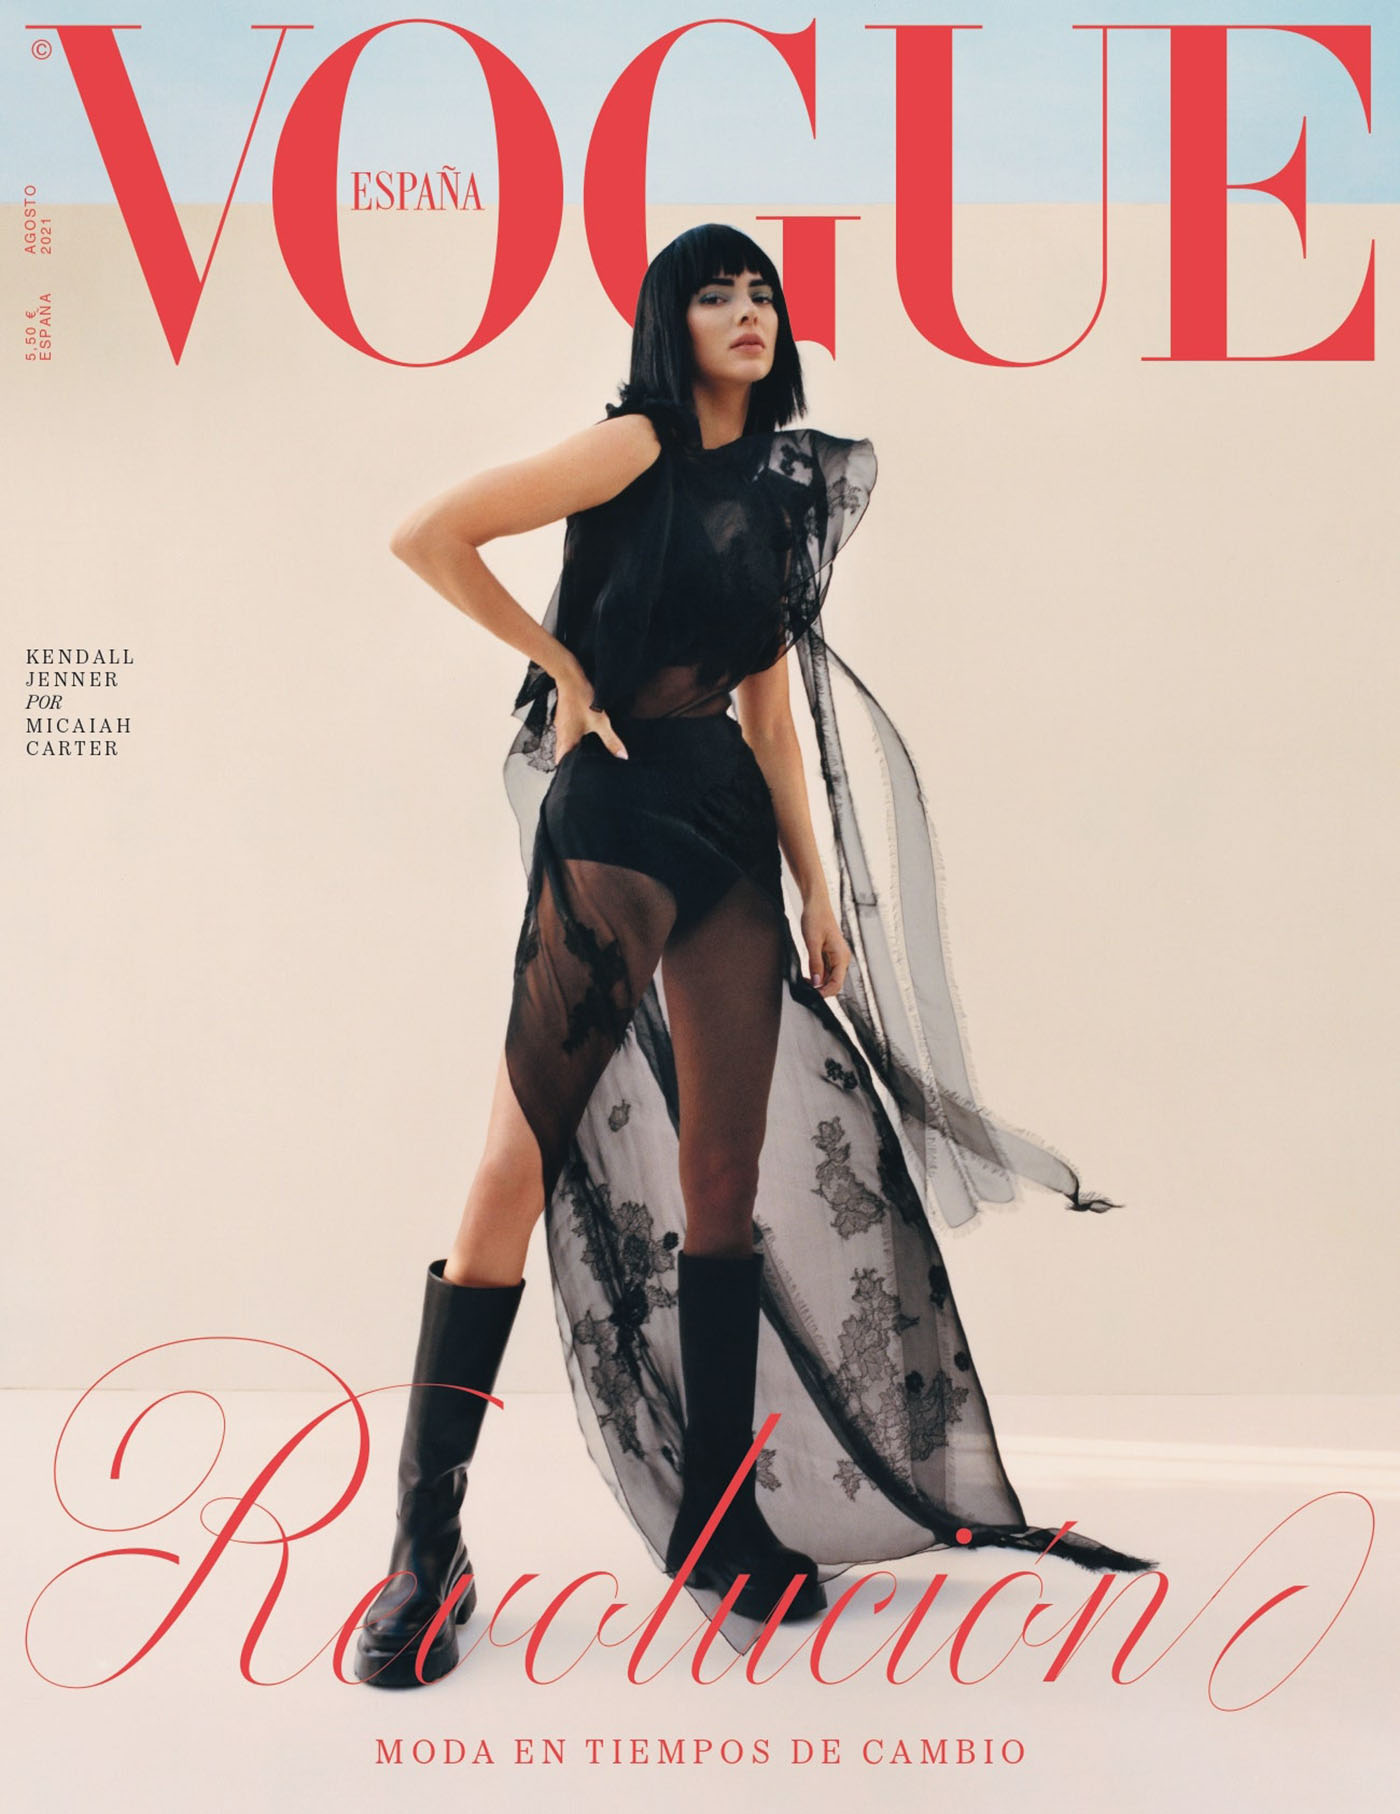 Kendall Jenner covers Vogue Spain August 2021 by Micaiah Carter